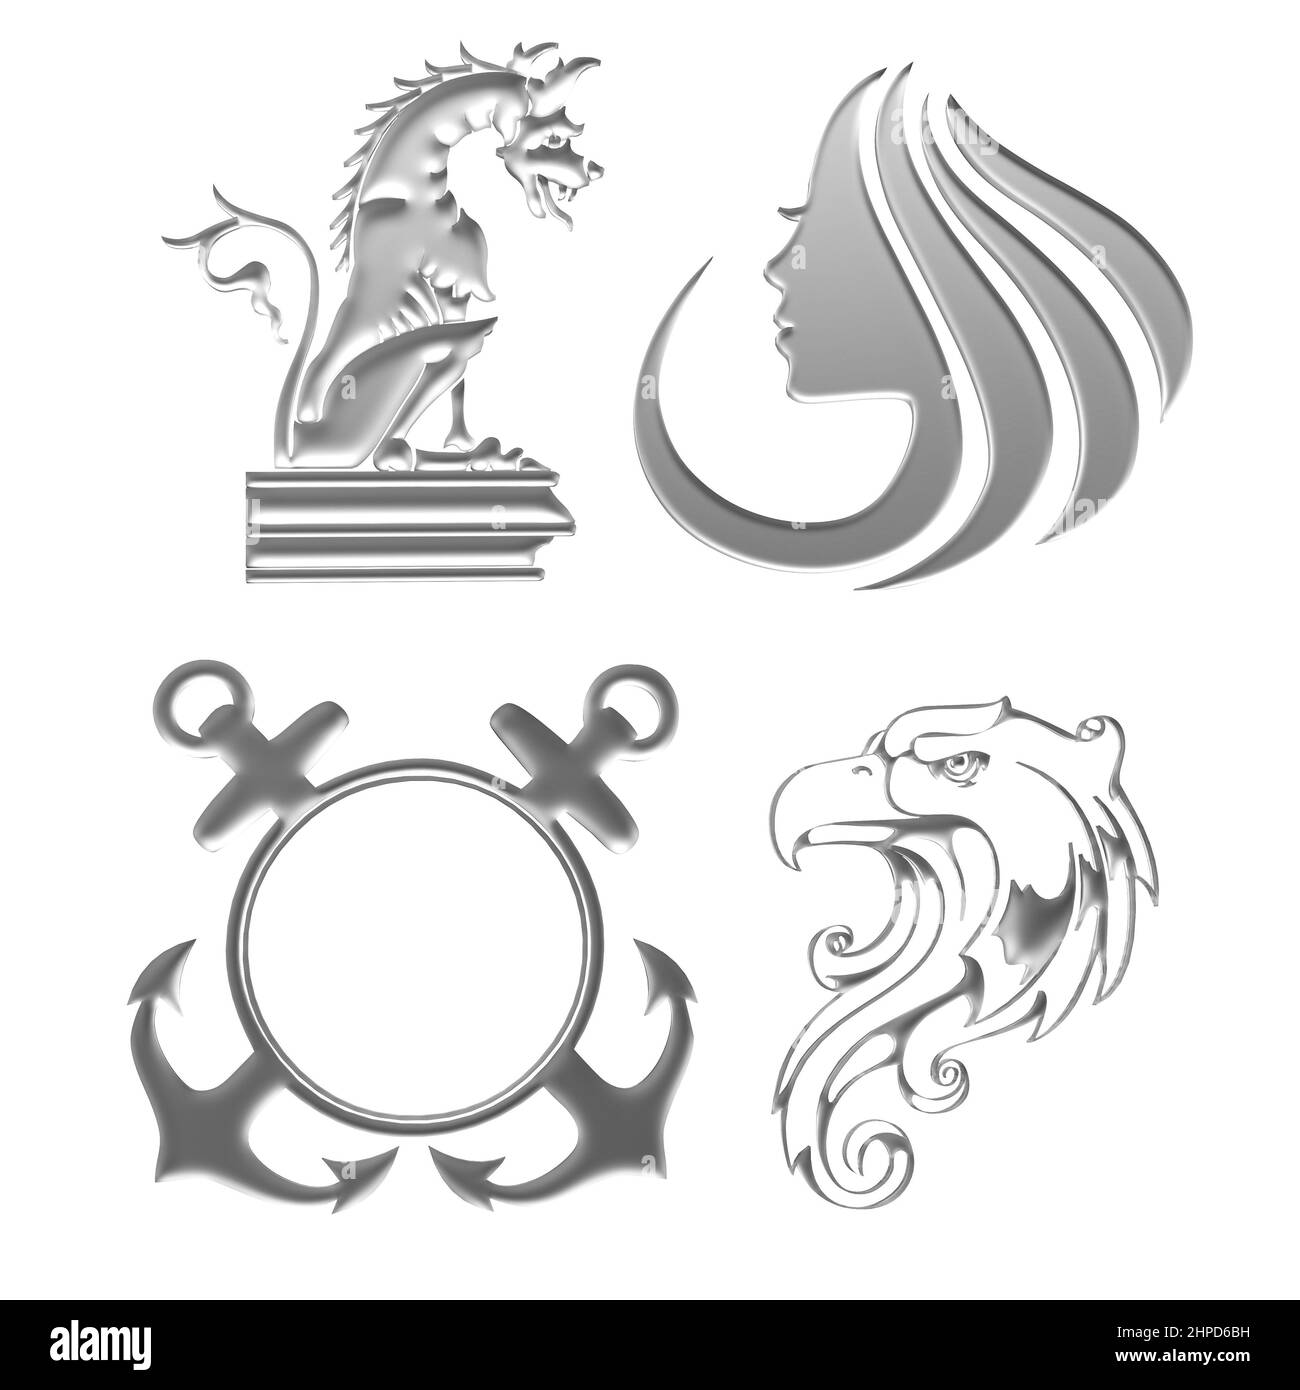 Eagle, Dragon, Anchor, Woman’s Face Set of Symbols, in Natural Materials, 3D Illustration, 3D Rendering Stock Photo